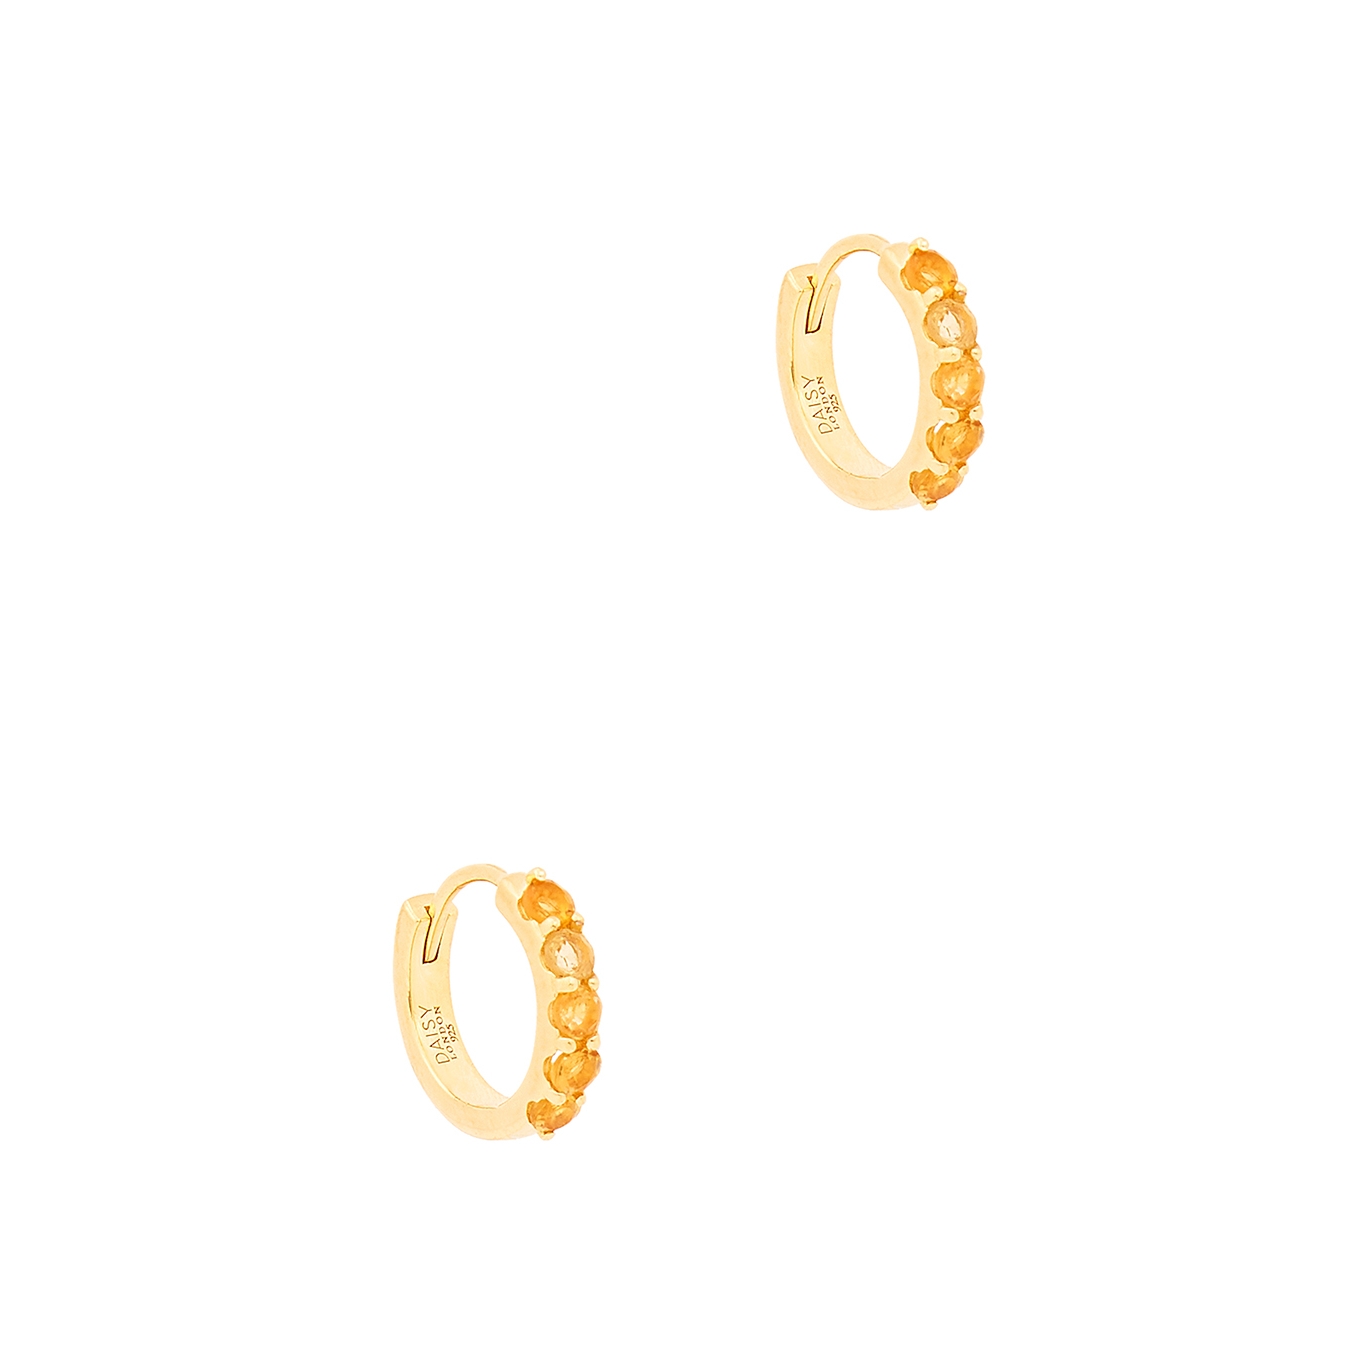 Daisy London Beloved Citrine 18kt Gold-plated Hoop Earrings - One Size